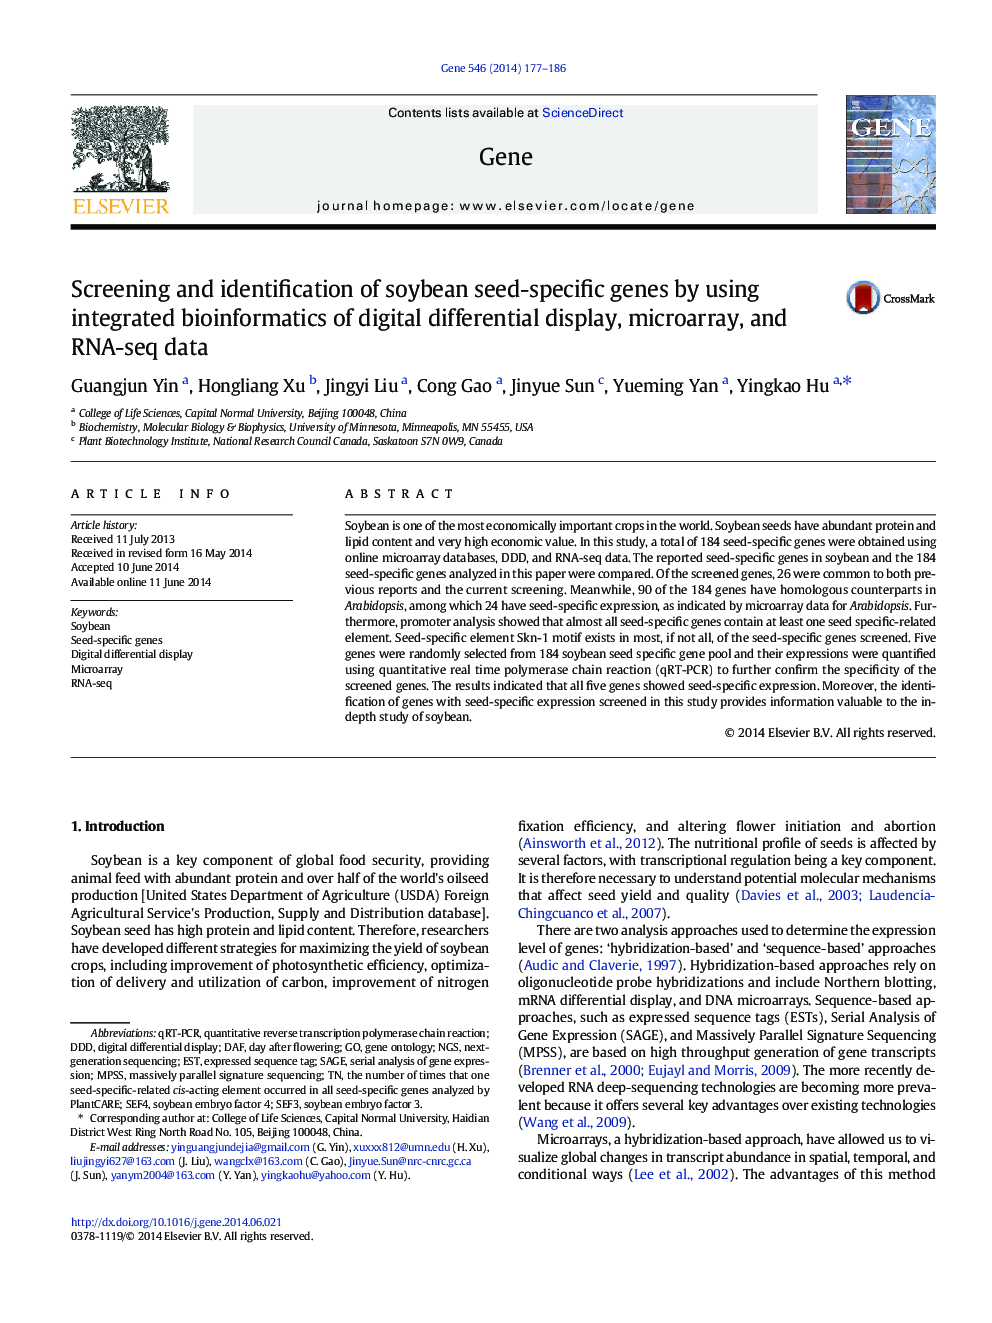 Screening and identification of soybean seed-specific genes by using integrated bioinformatics of digital differential display, microarray, and RNA-seq data